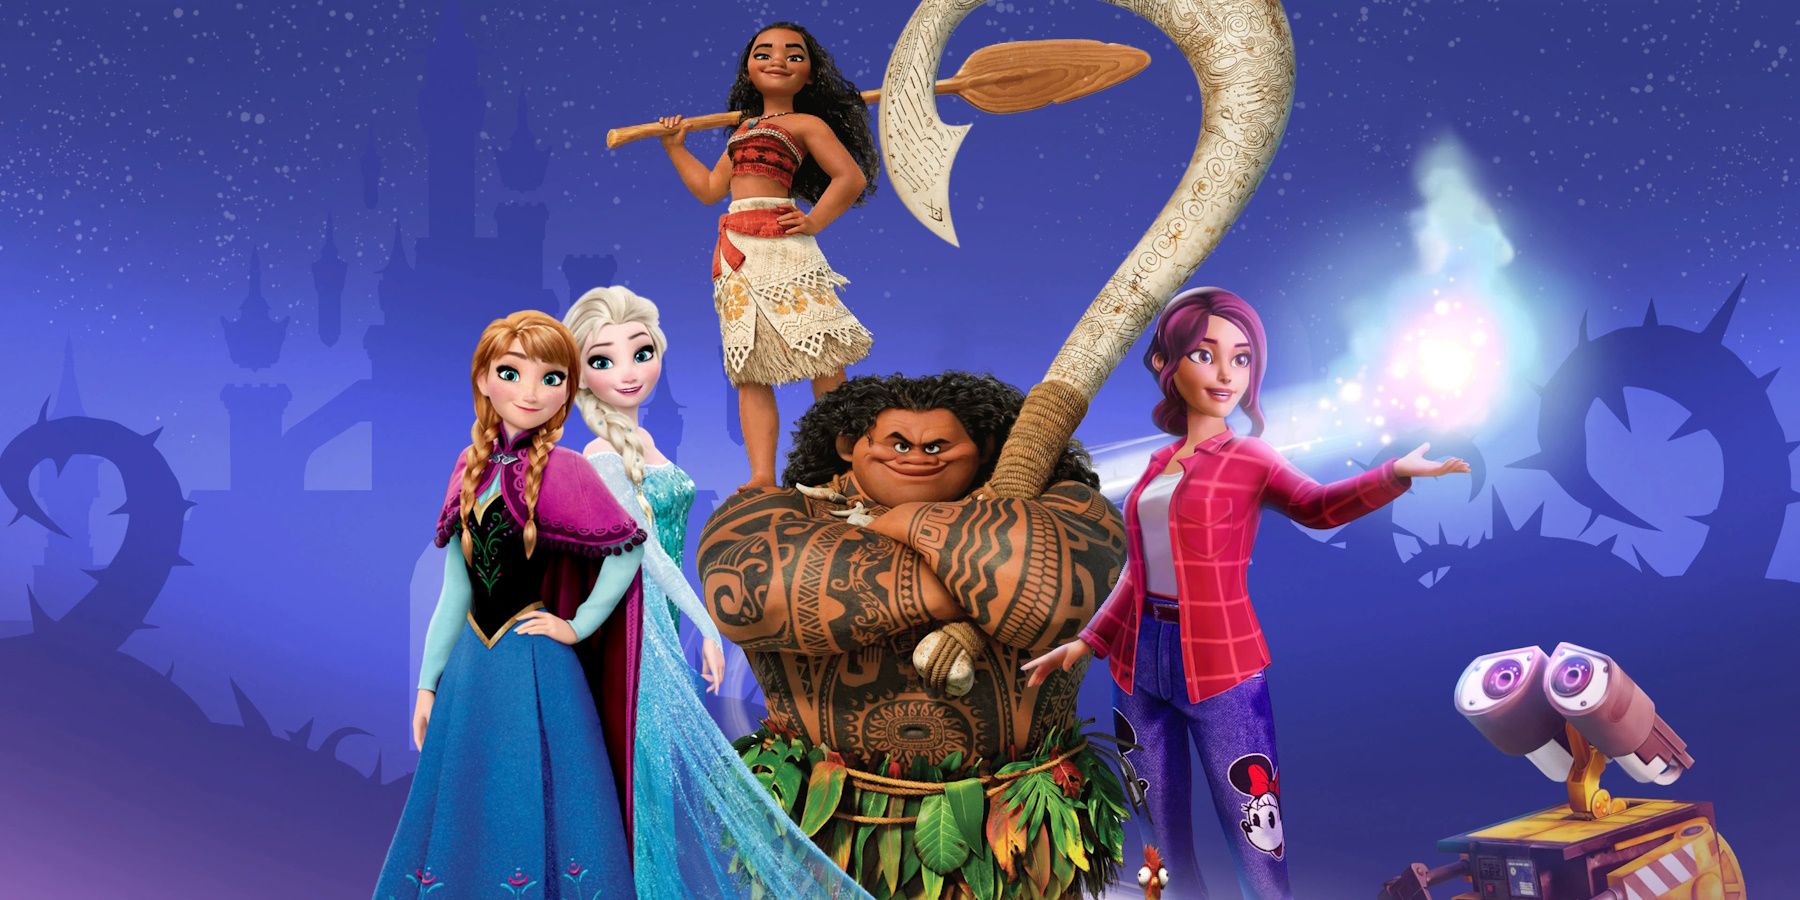 Disney Dreamlight Valley promo art overlaid with Moana and Frozen characters